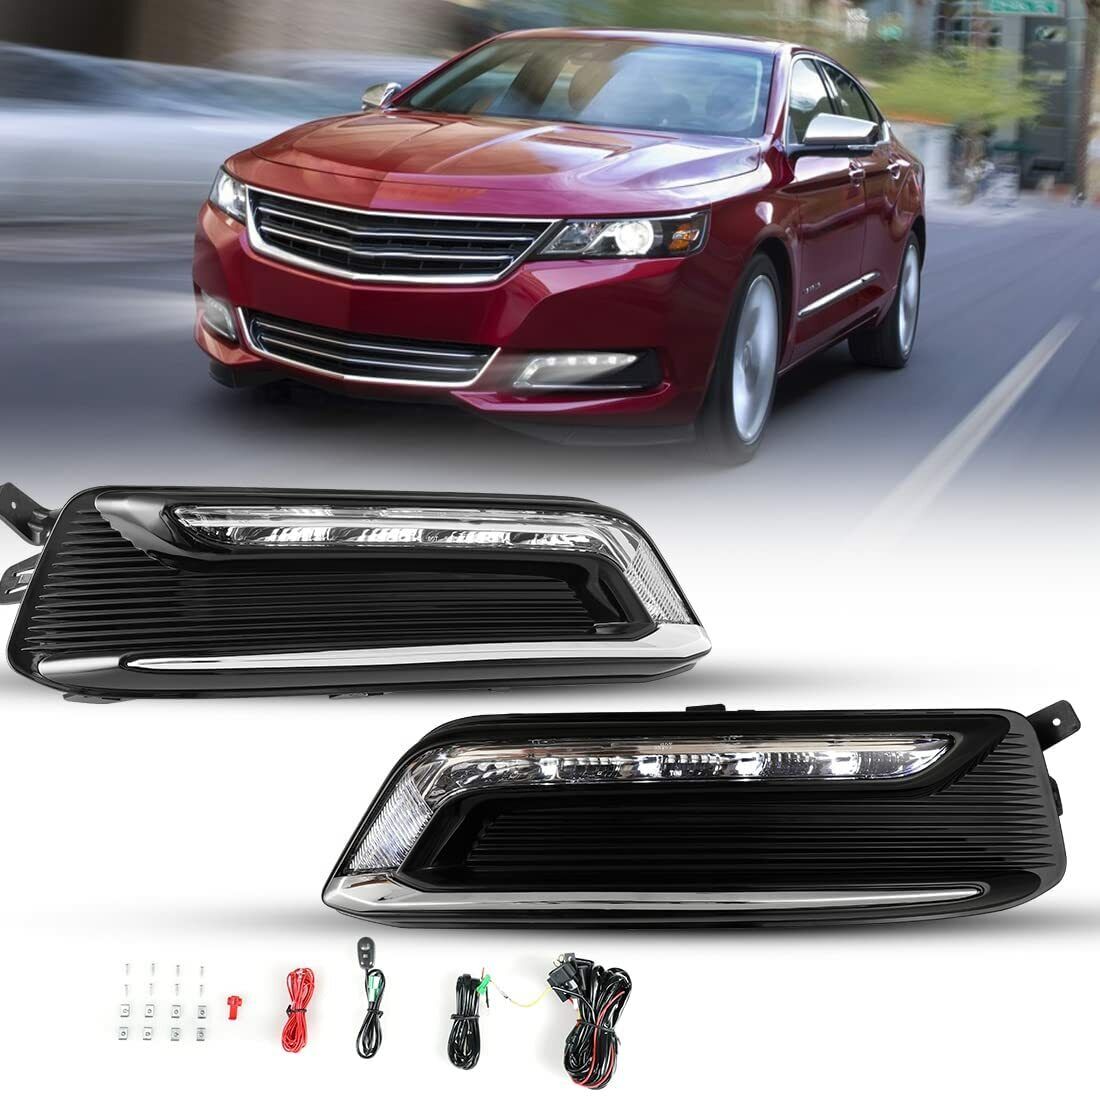 LED Fog Lights For 14-20 Chevy Impala Day Running Lamps + Wiring Harness Switch